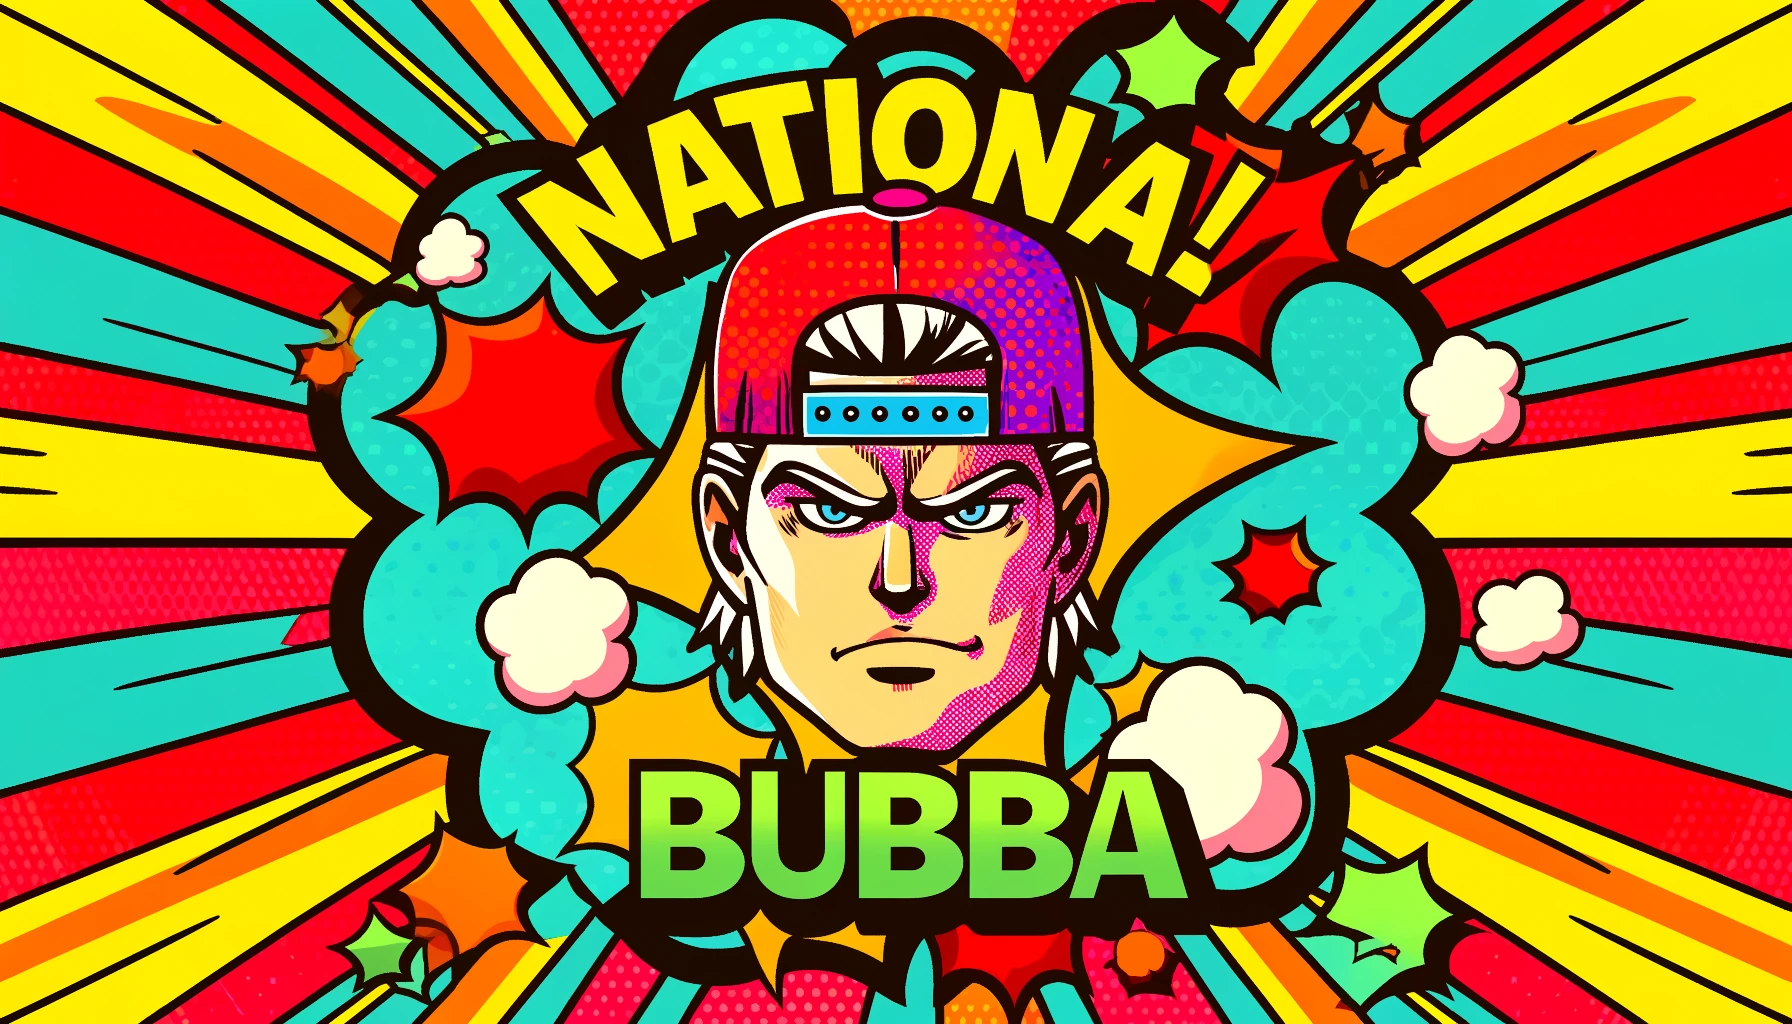 National Bubba Day